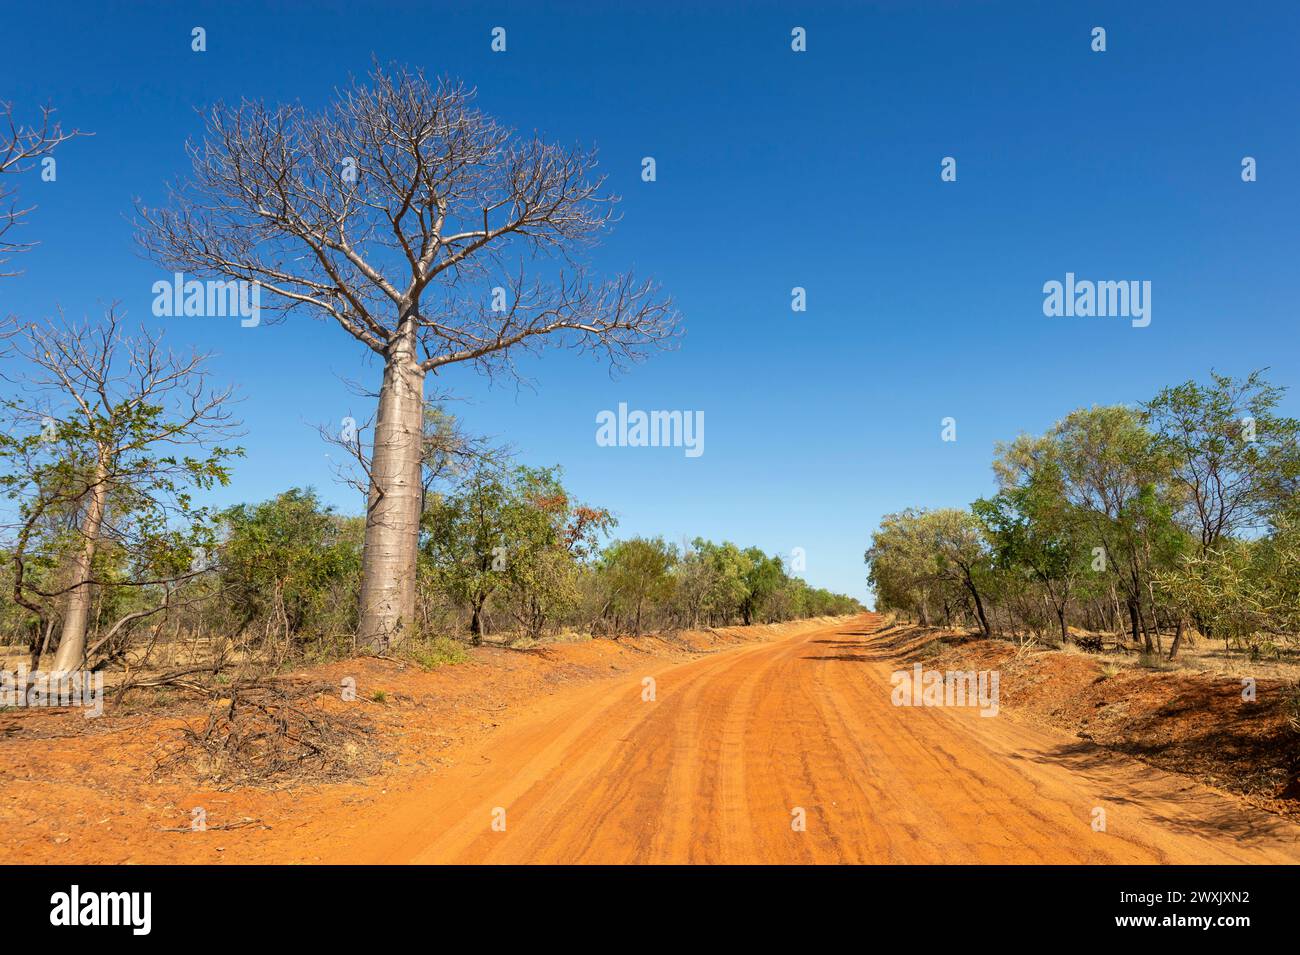 Typical Outback scenery with a red dirt road and boab tree (Adansonia gregorii), near Fitzroy Crossing, Western Australia, WA, Australia Stock Photo